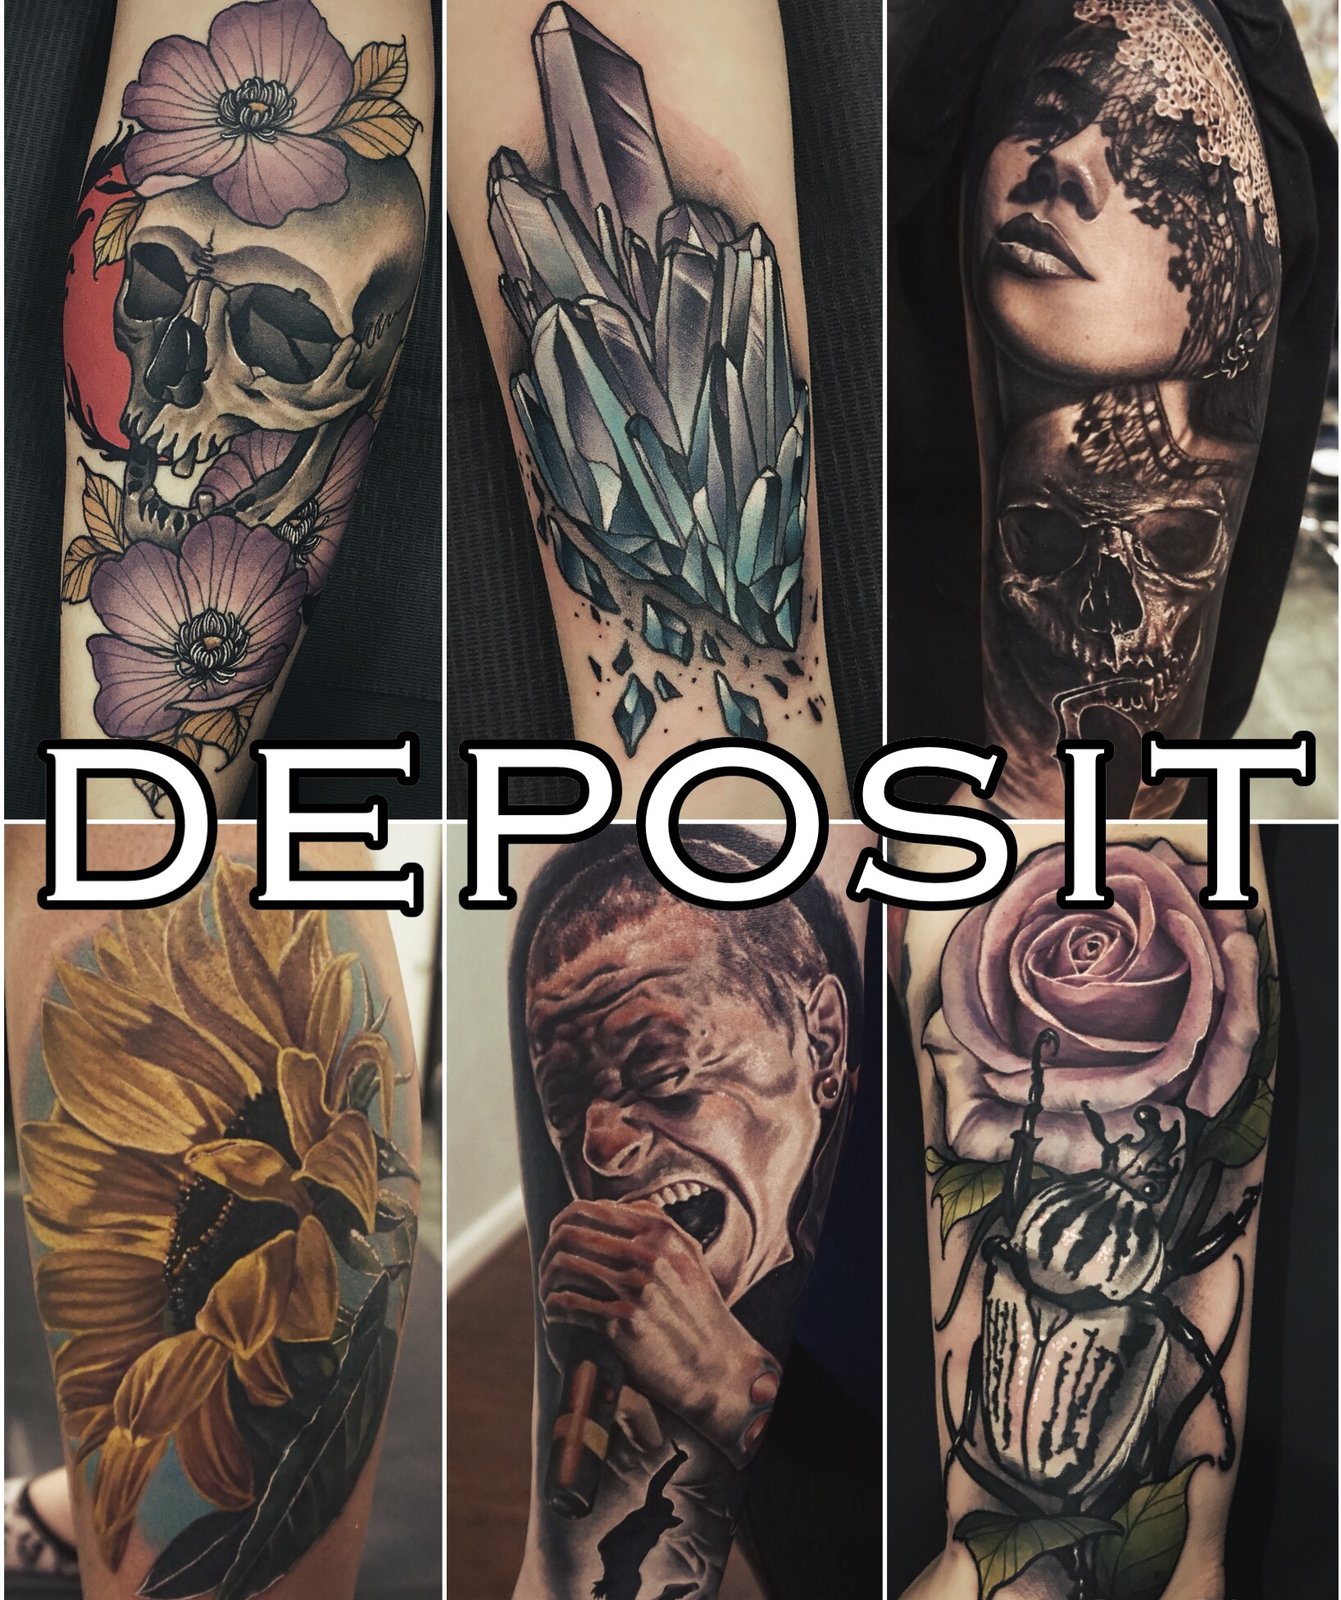 Tattoo Shops | AppointmentReminder.com